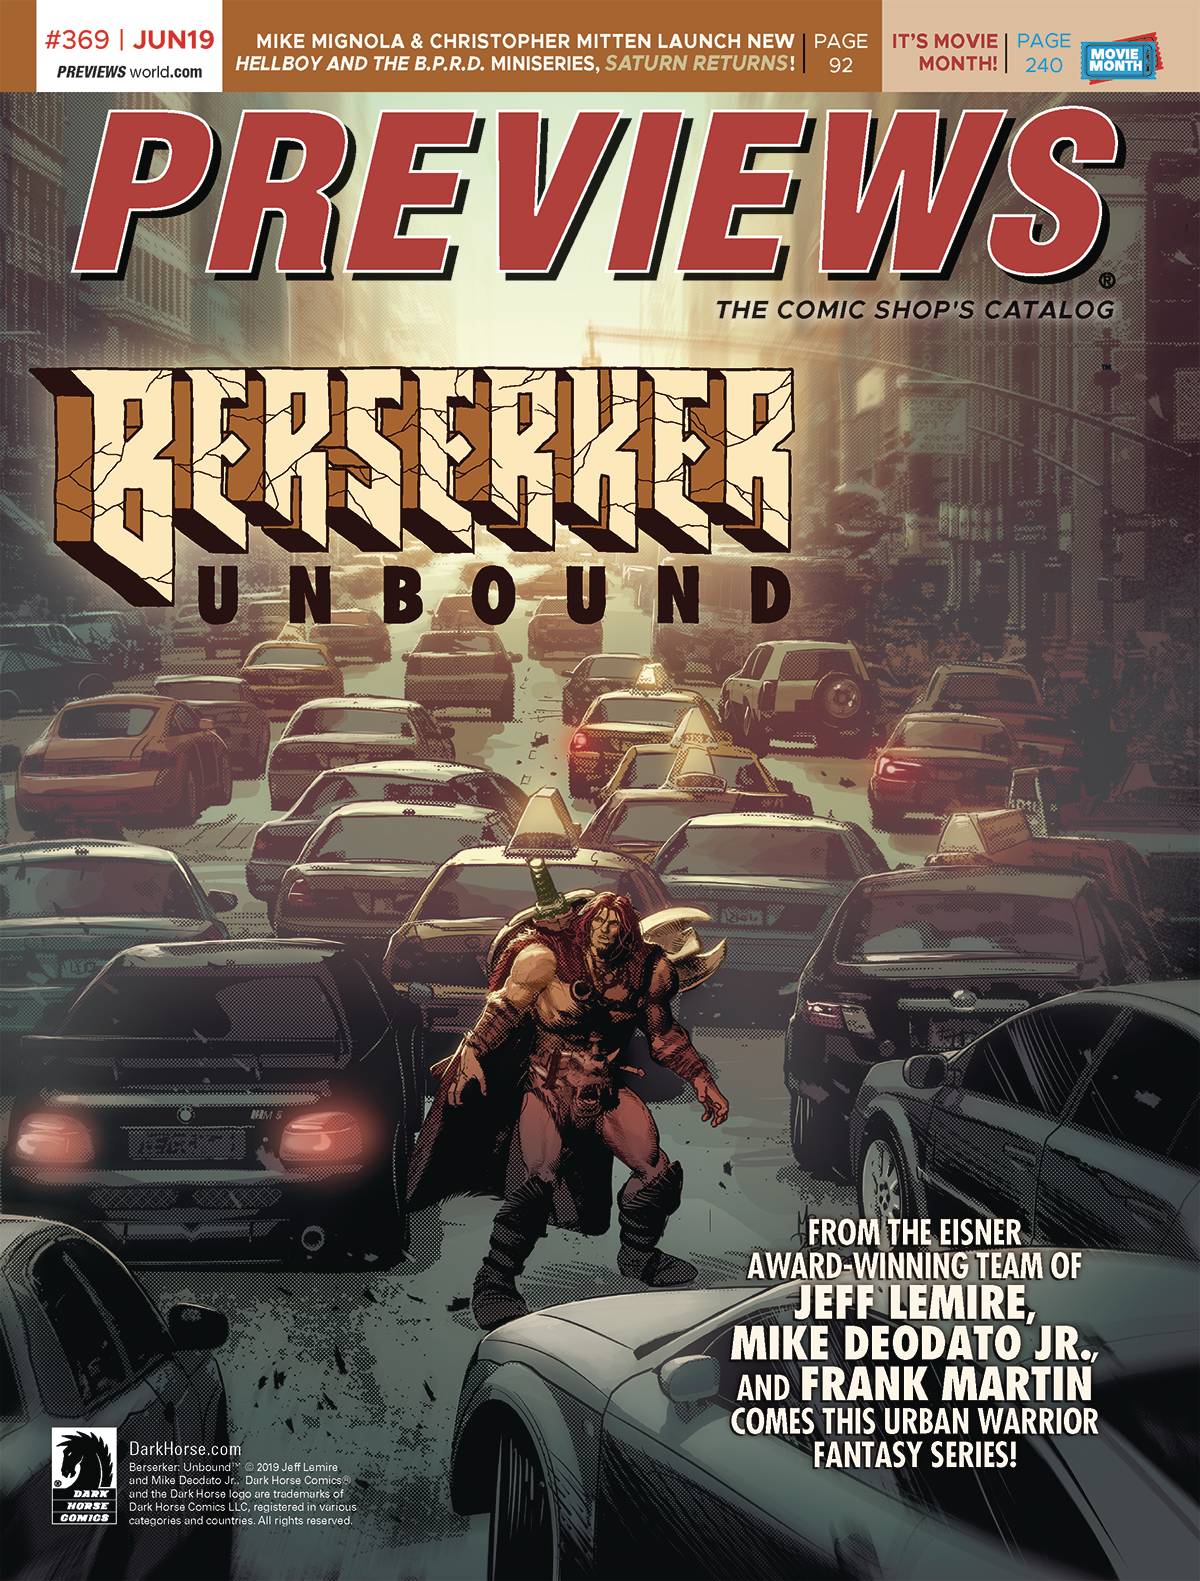 Previews #371 August 2019 #371